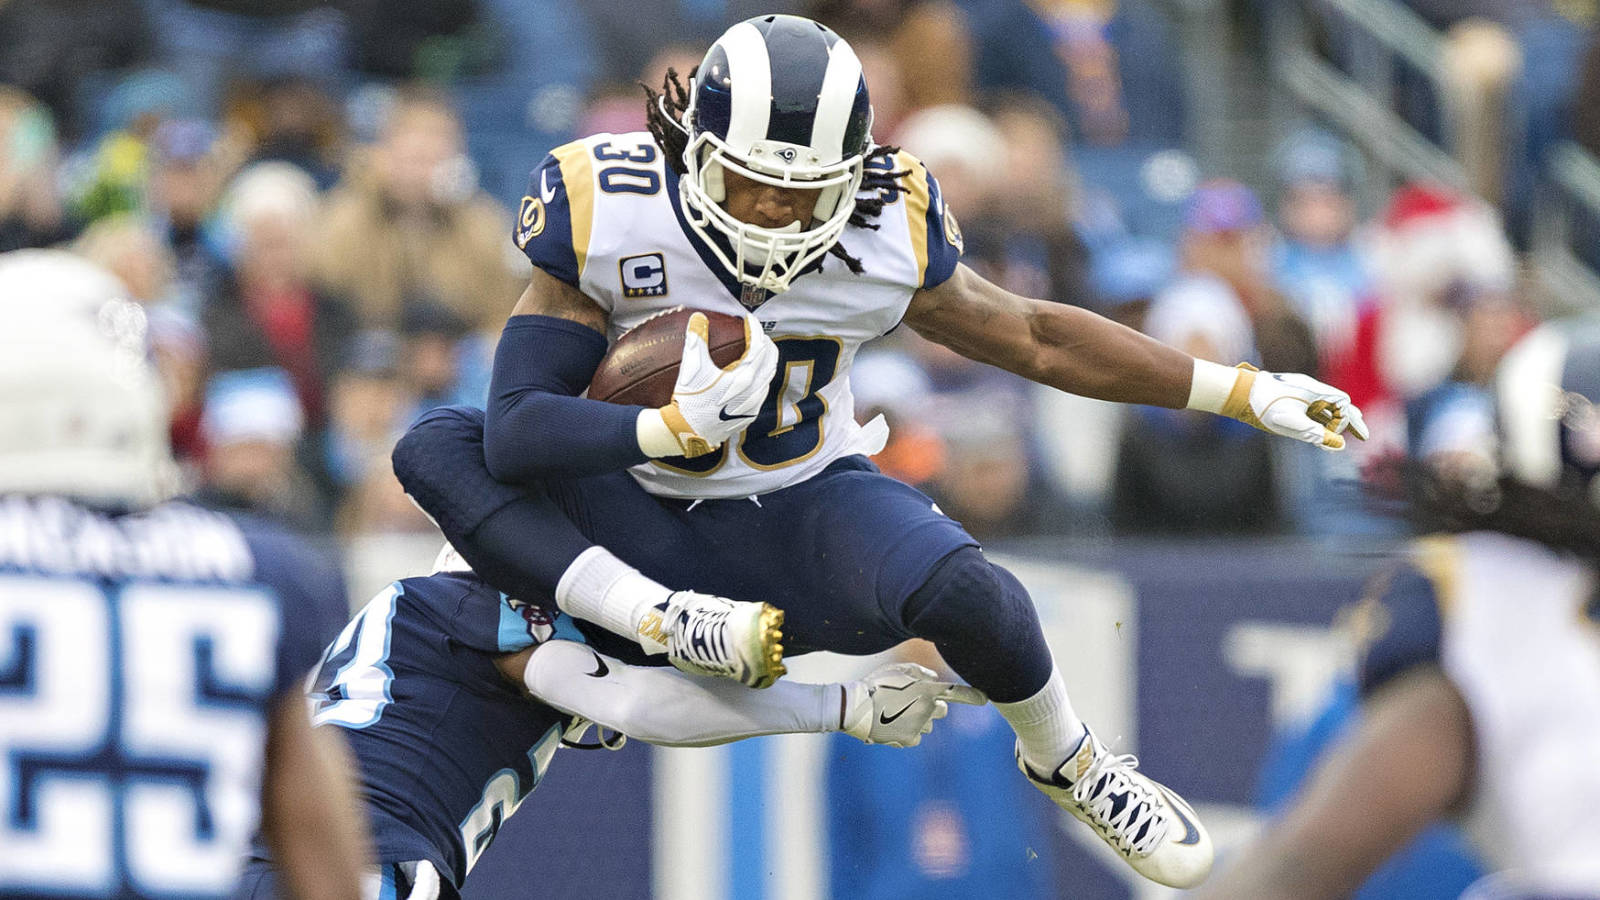 todd gurley nfl